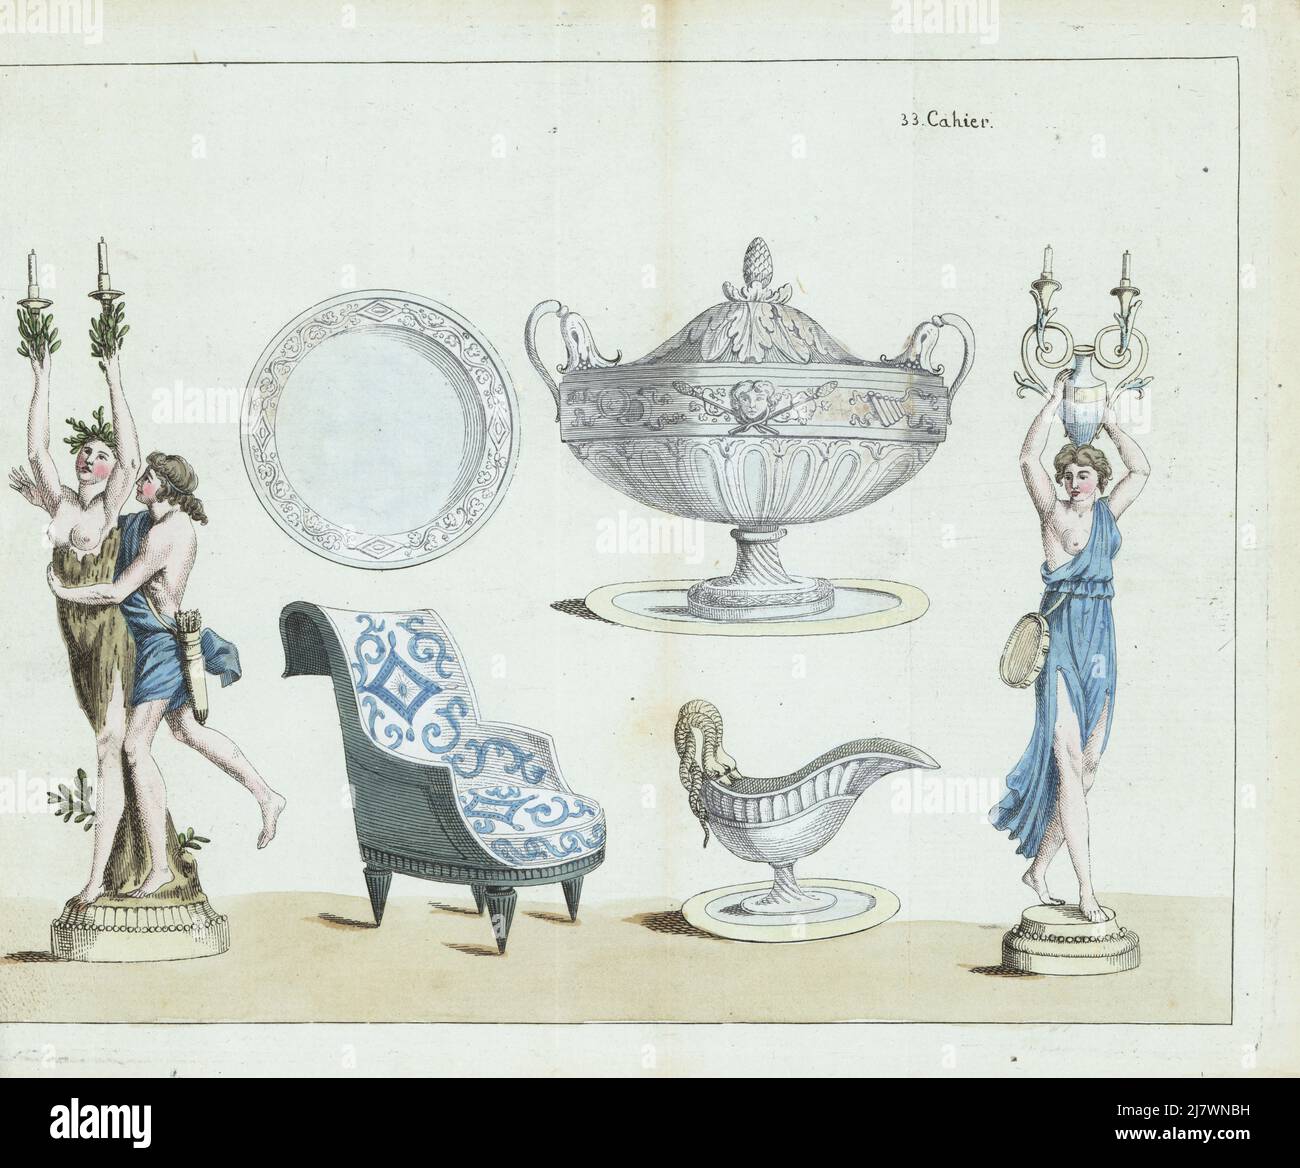 Furniture and tableware, Revolutionary France. Candelabra with Daphne and Apollo, silver plate, armchair, silver pot-a-oille, oil jug with serpent handle and Bacchante candlestick. Handcoloured copperplate engraving from Jean-Antoine le Brun or Lebrun-Tossa’s Journal de la Mode et du Gout, previously Cabinet des Modes, Chez Buisson, Paris, and Joseph le Boffe, London, 33me Cahier, 15 January 1791. Stock Photo